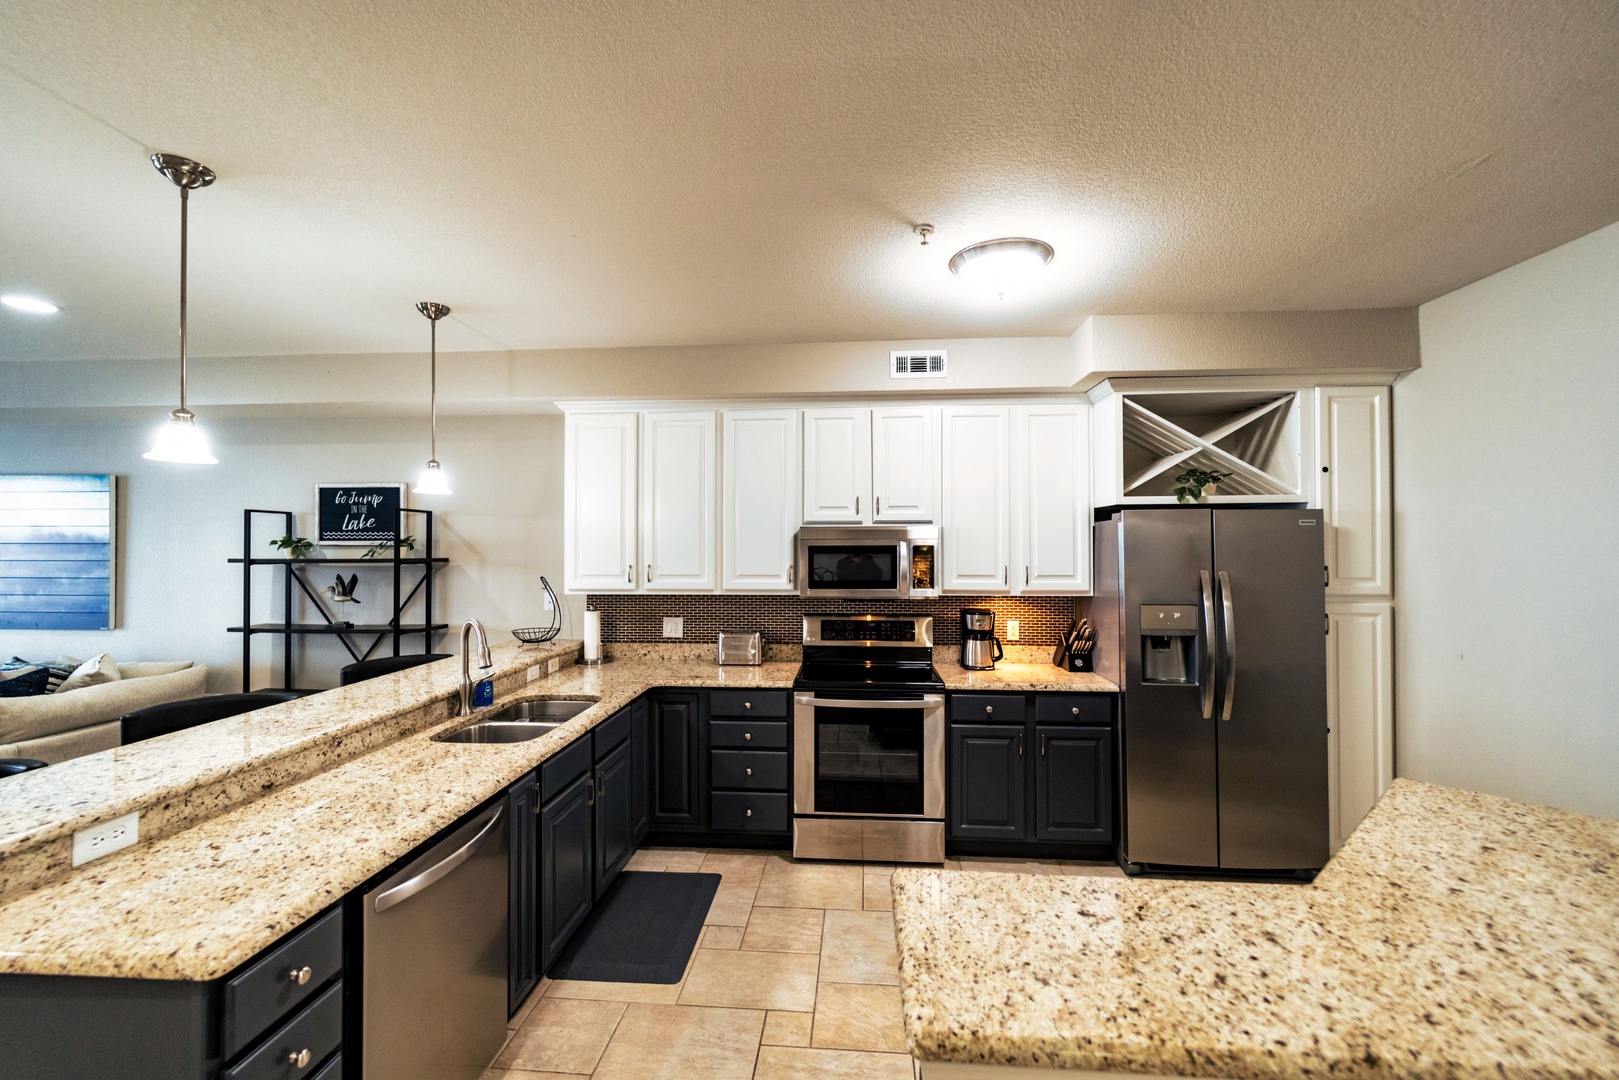 The airy, open kitchen offers ample storage & all the comforts of home